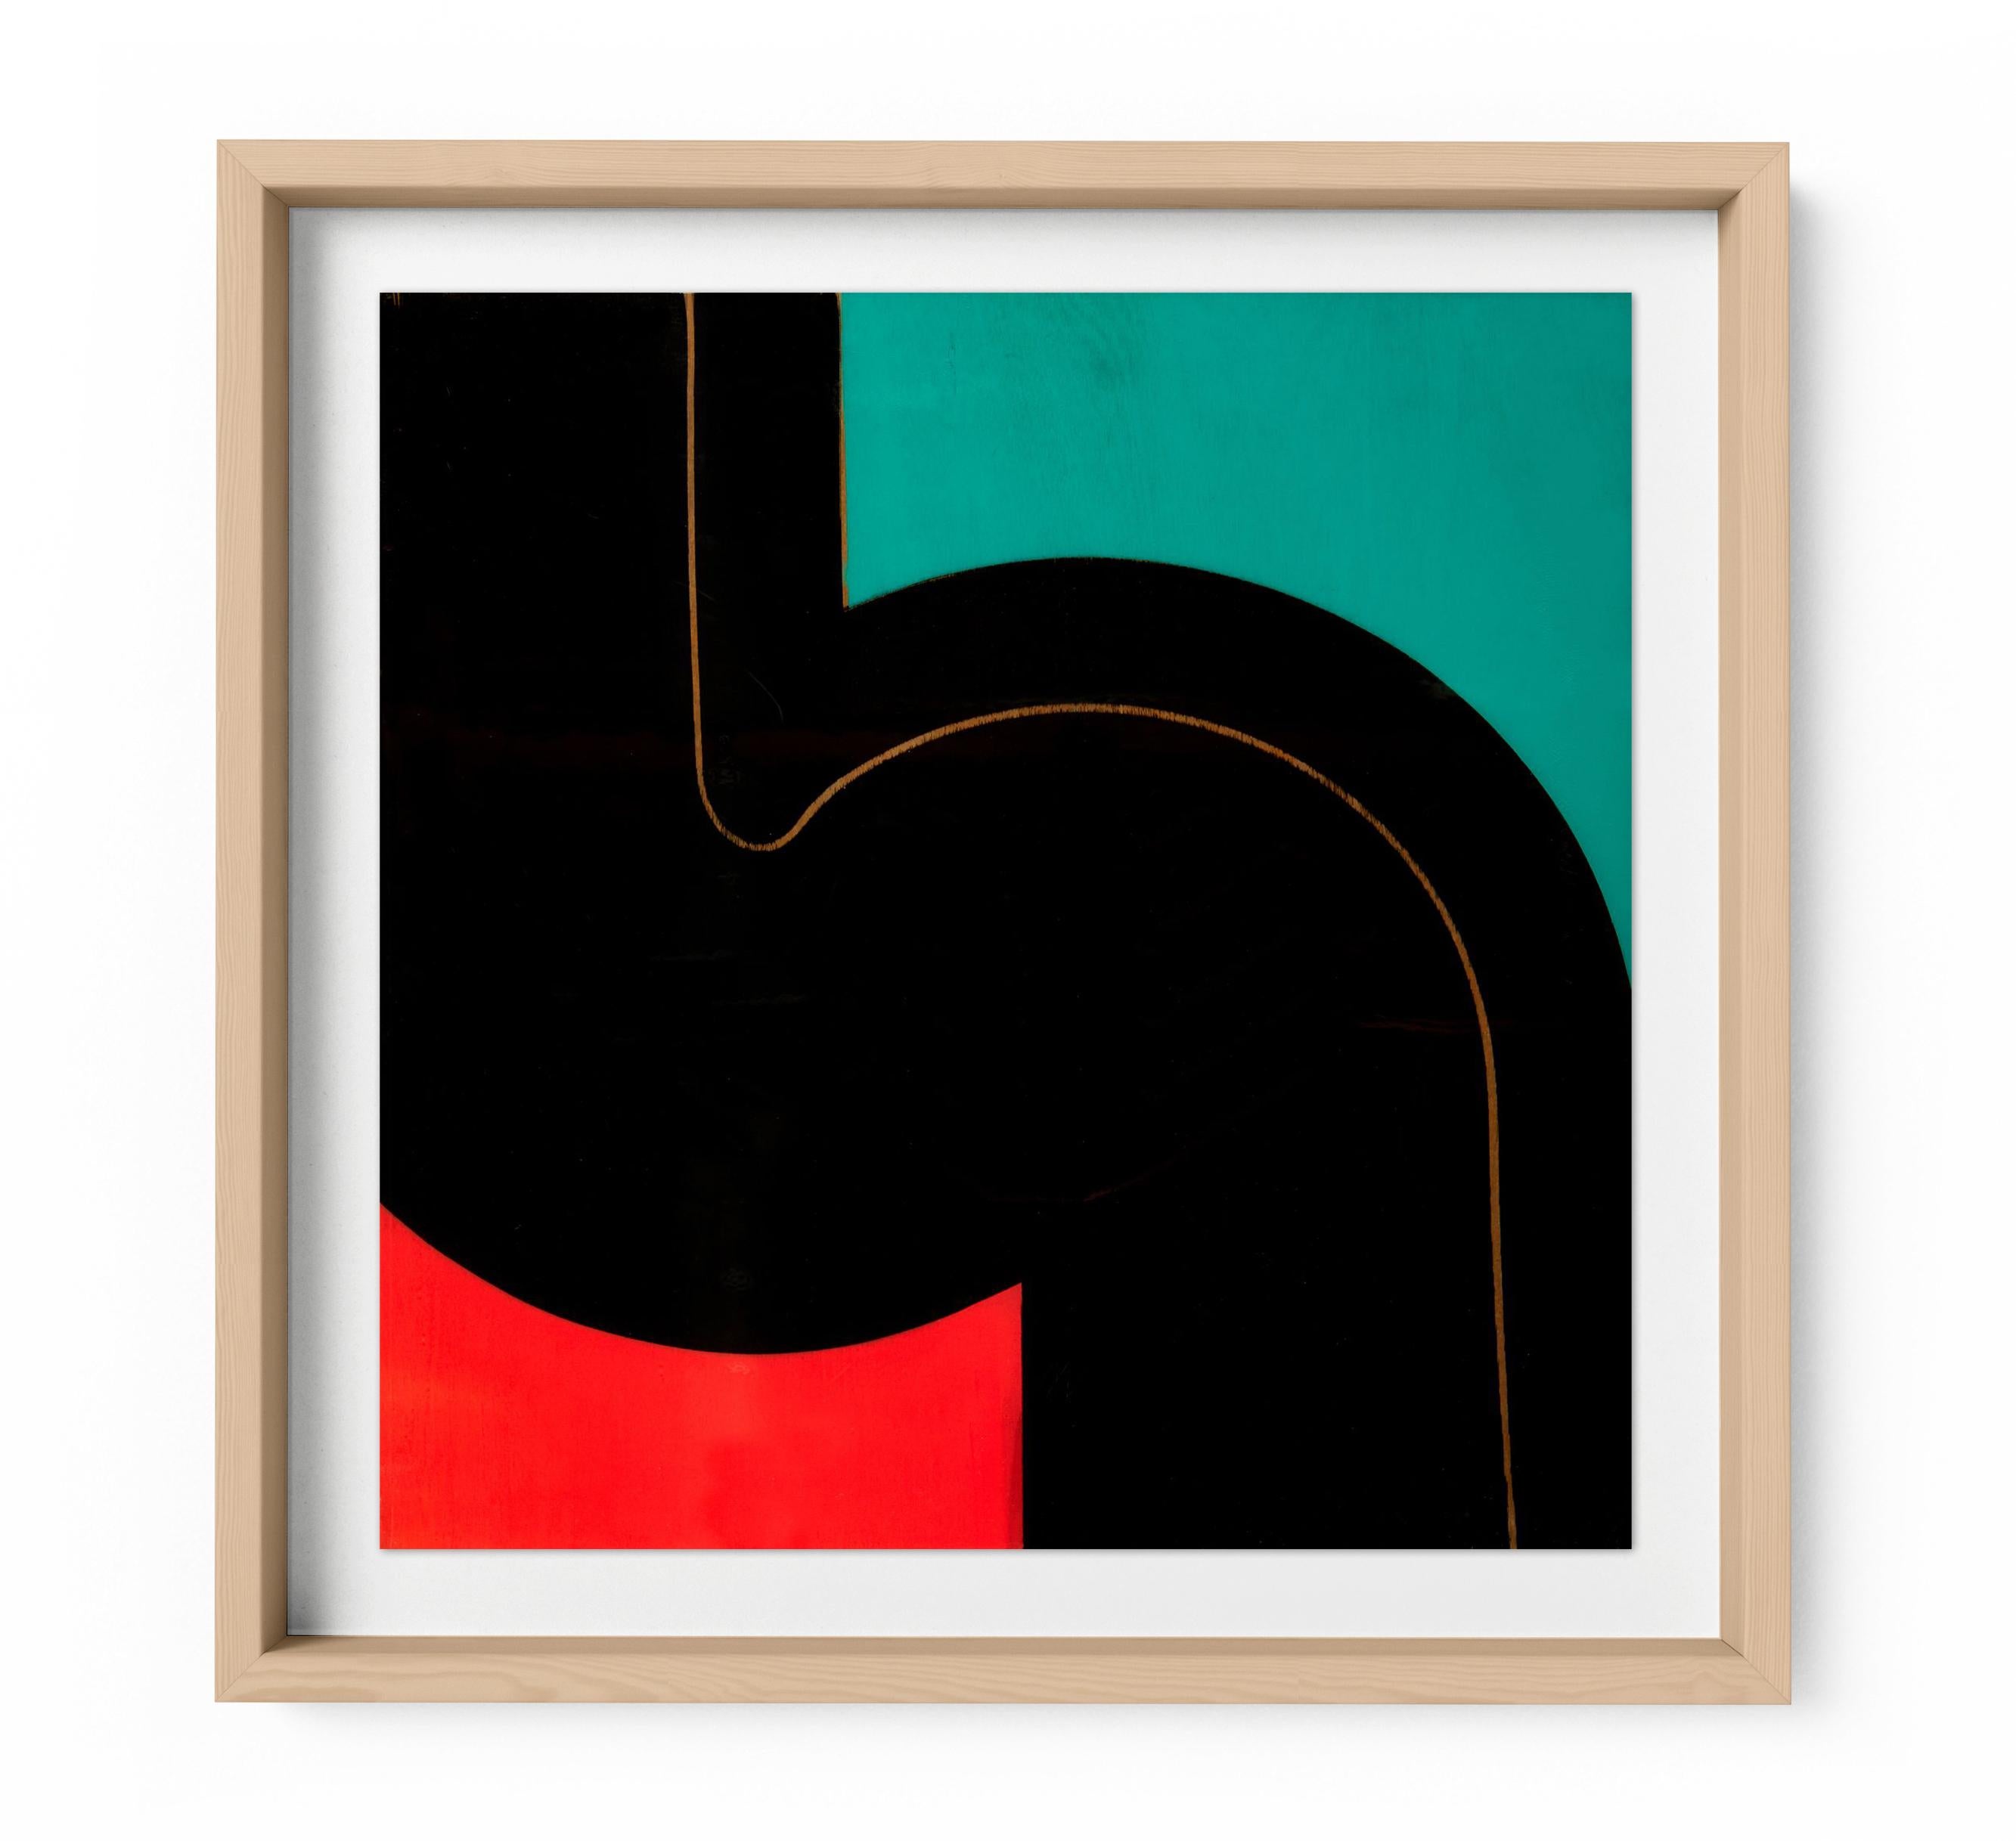 Redline - Framed Limited Edition Print - Contemporary - Modern Abstract - Beige Abstract Print by Karlos Marquez